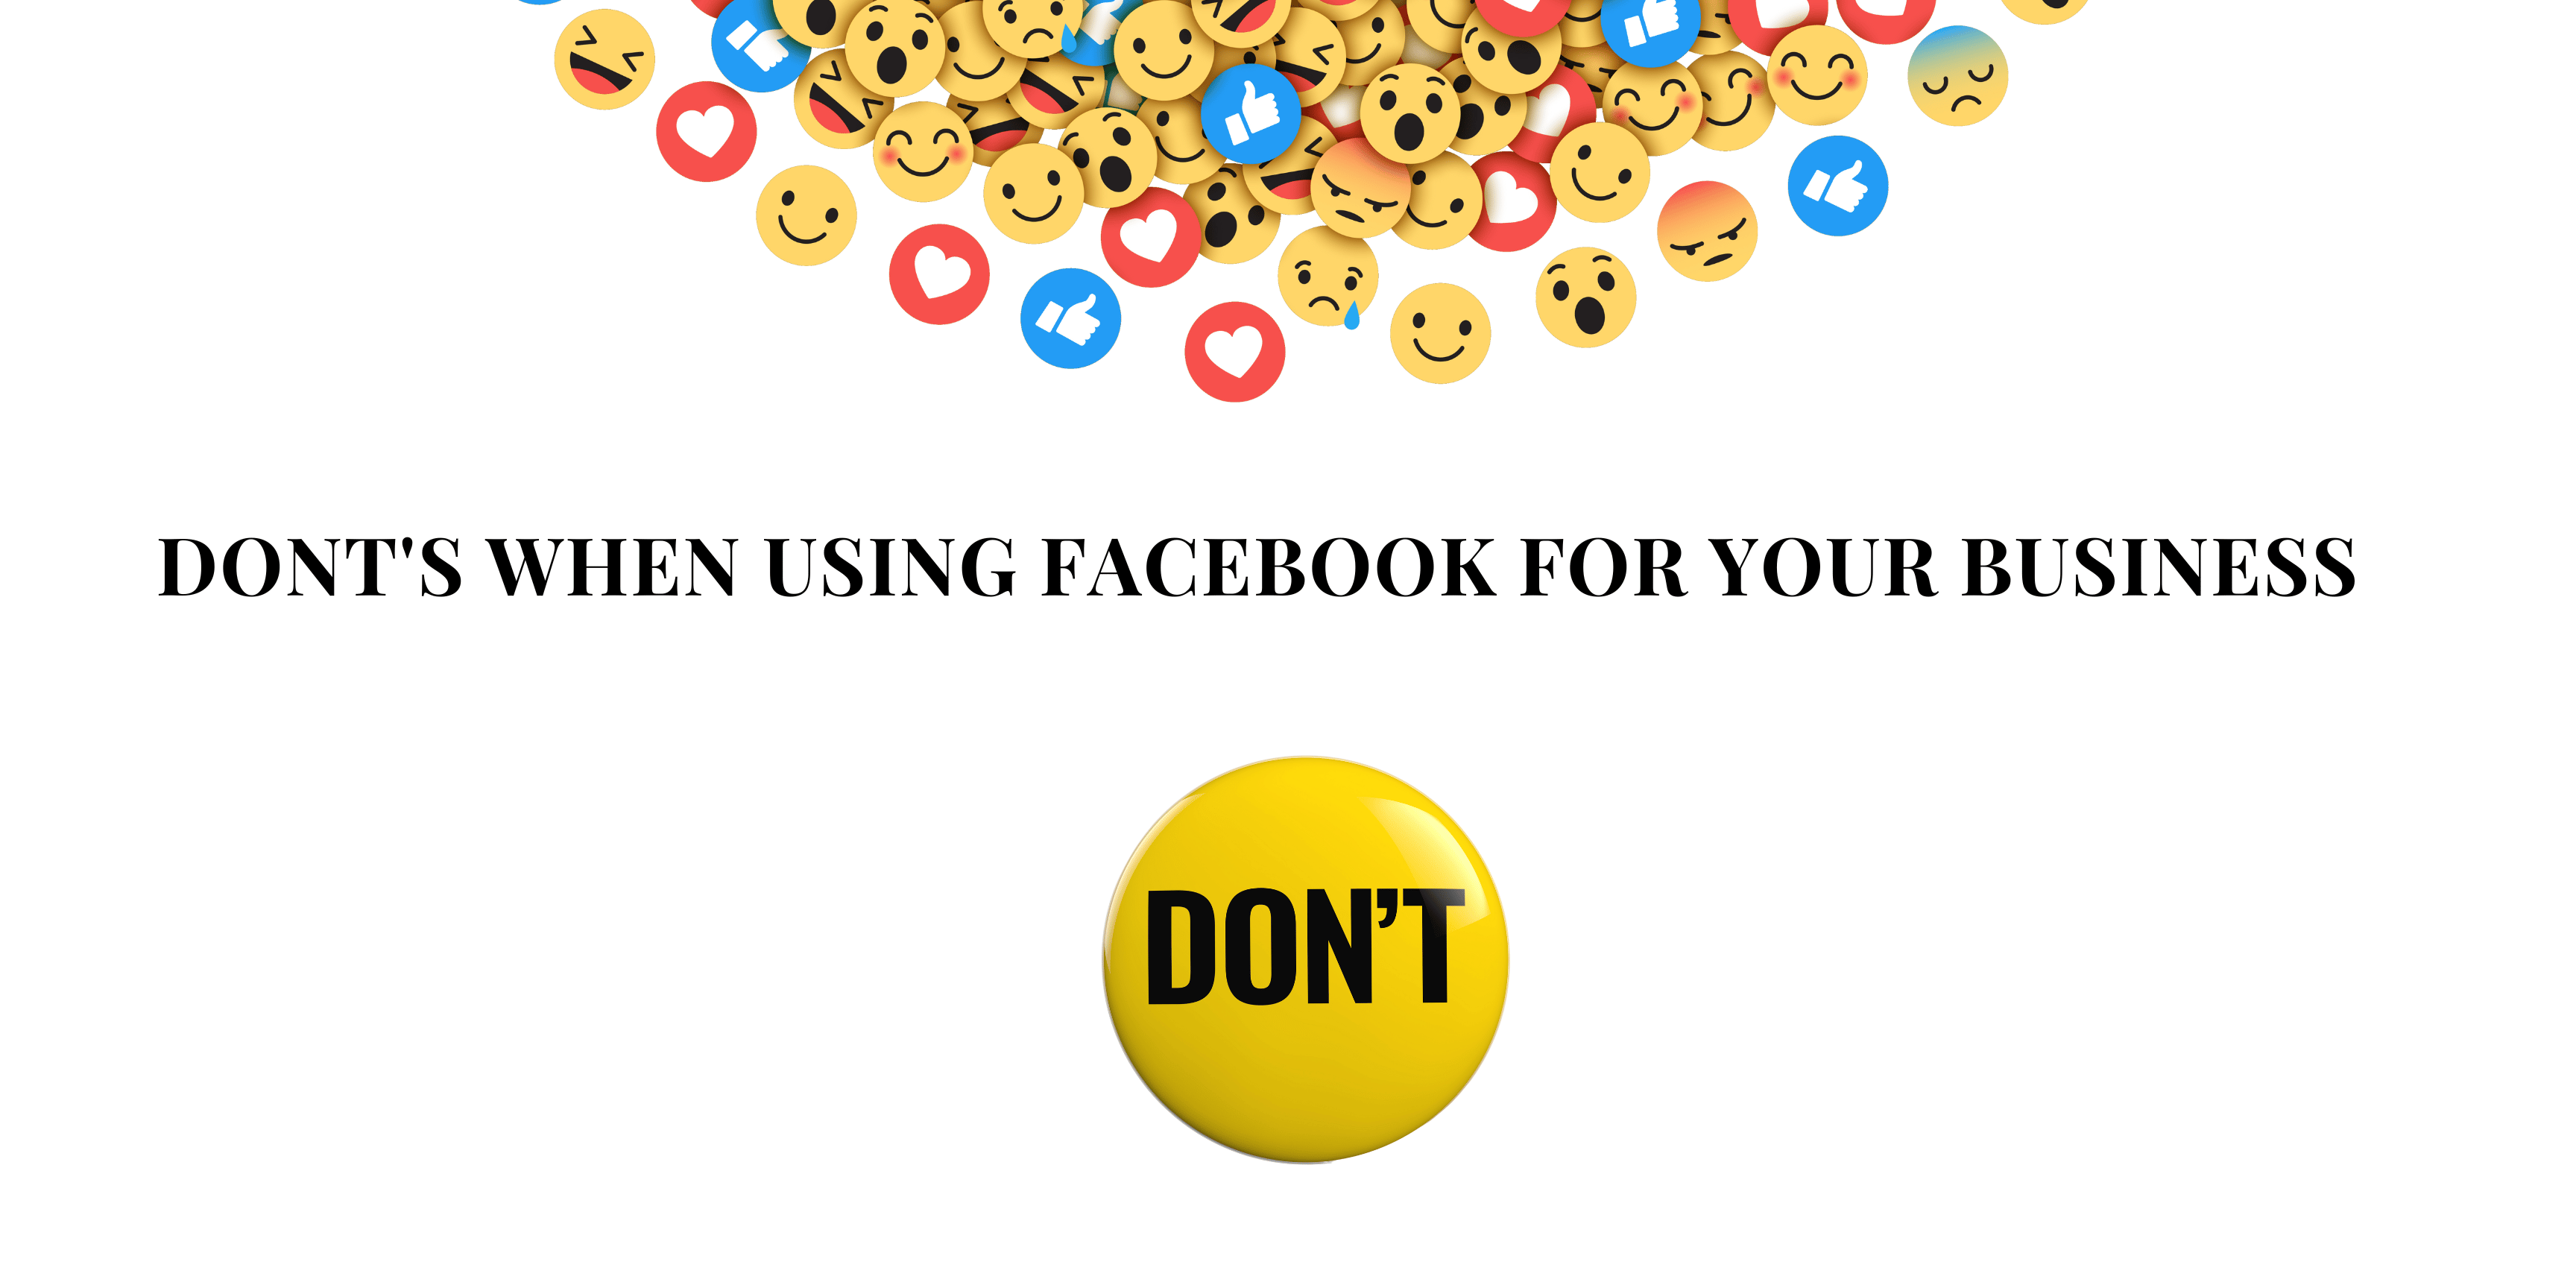 7 Dont's When Using Facebook For Your Business